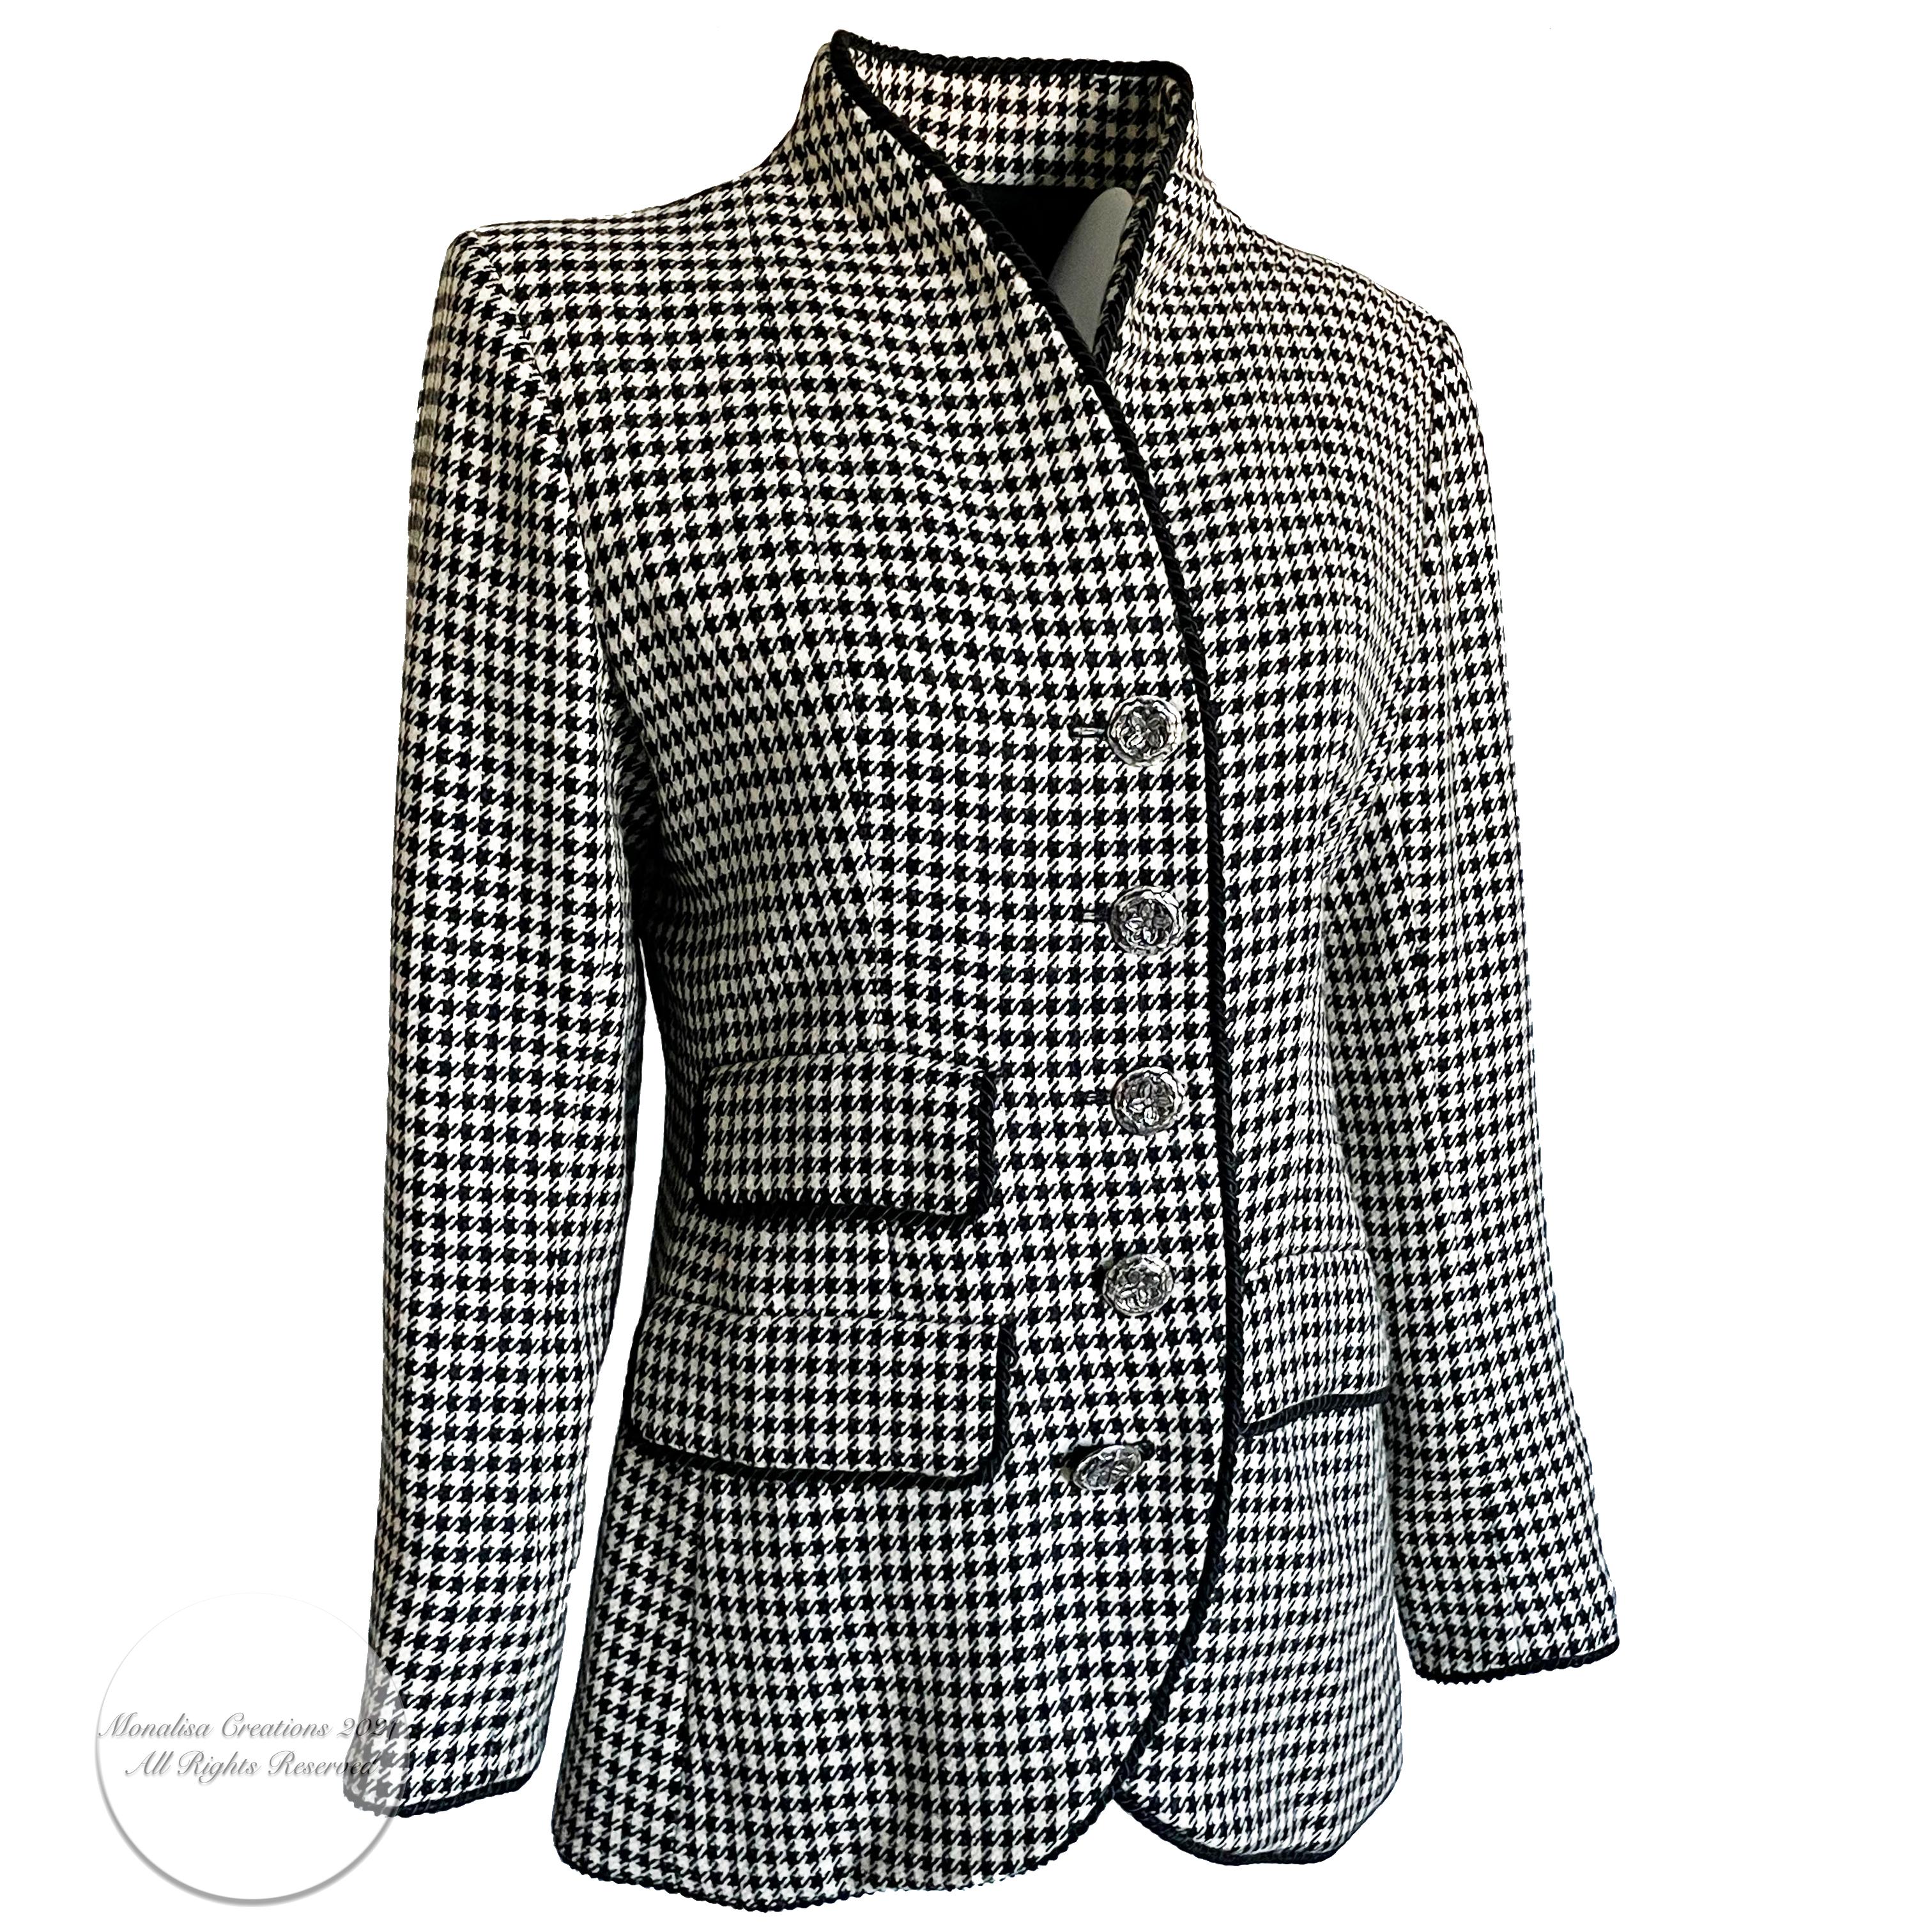   Authentic, preowned, vintage Yves Saint Laurent Rive Gauche jacket, circa the 90s. Fabulous jacket with great attention to details! Made of black & white houndstooth wool blend fabric with black satin twisted rope trim, including back detail, and